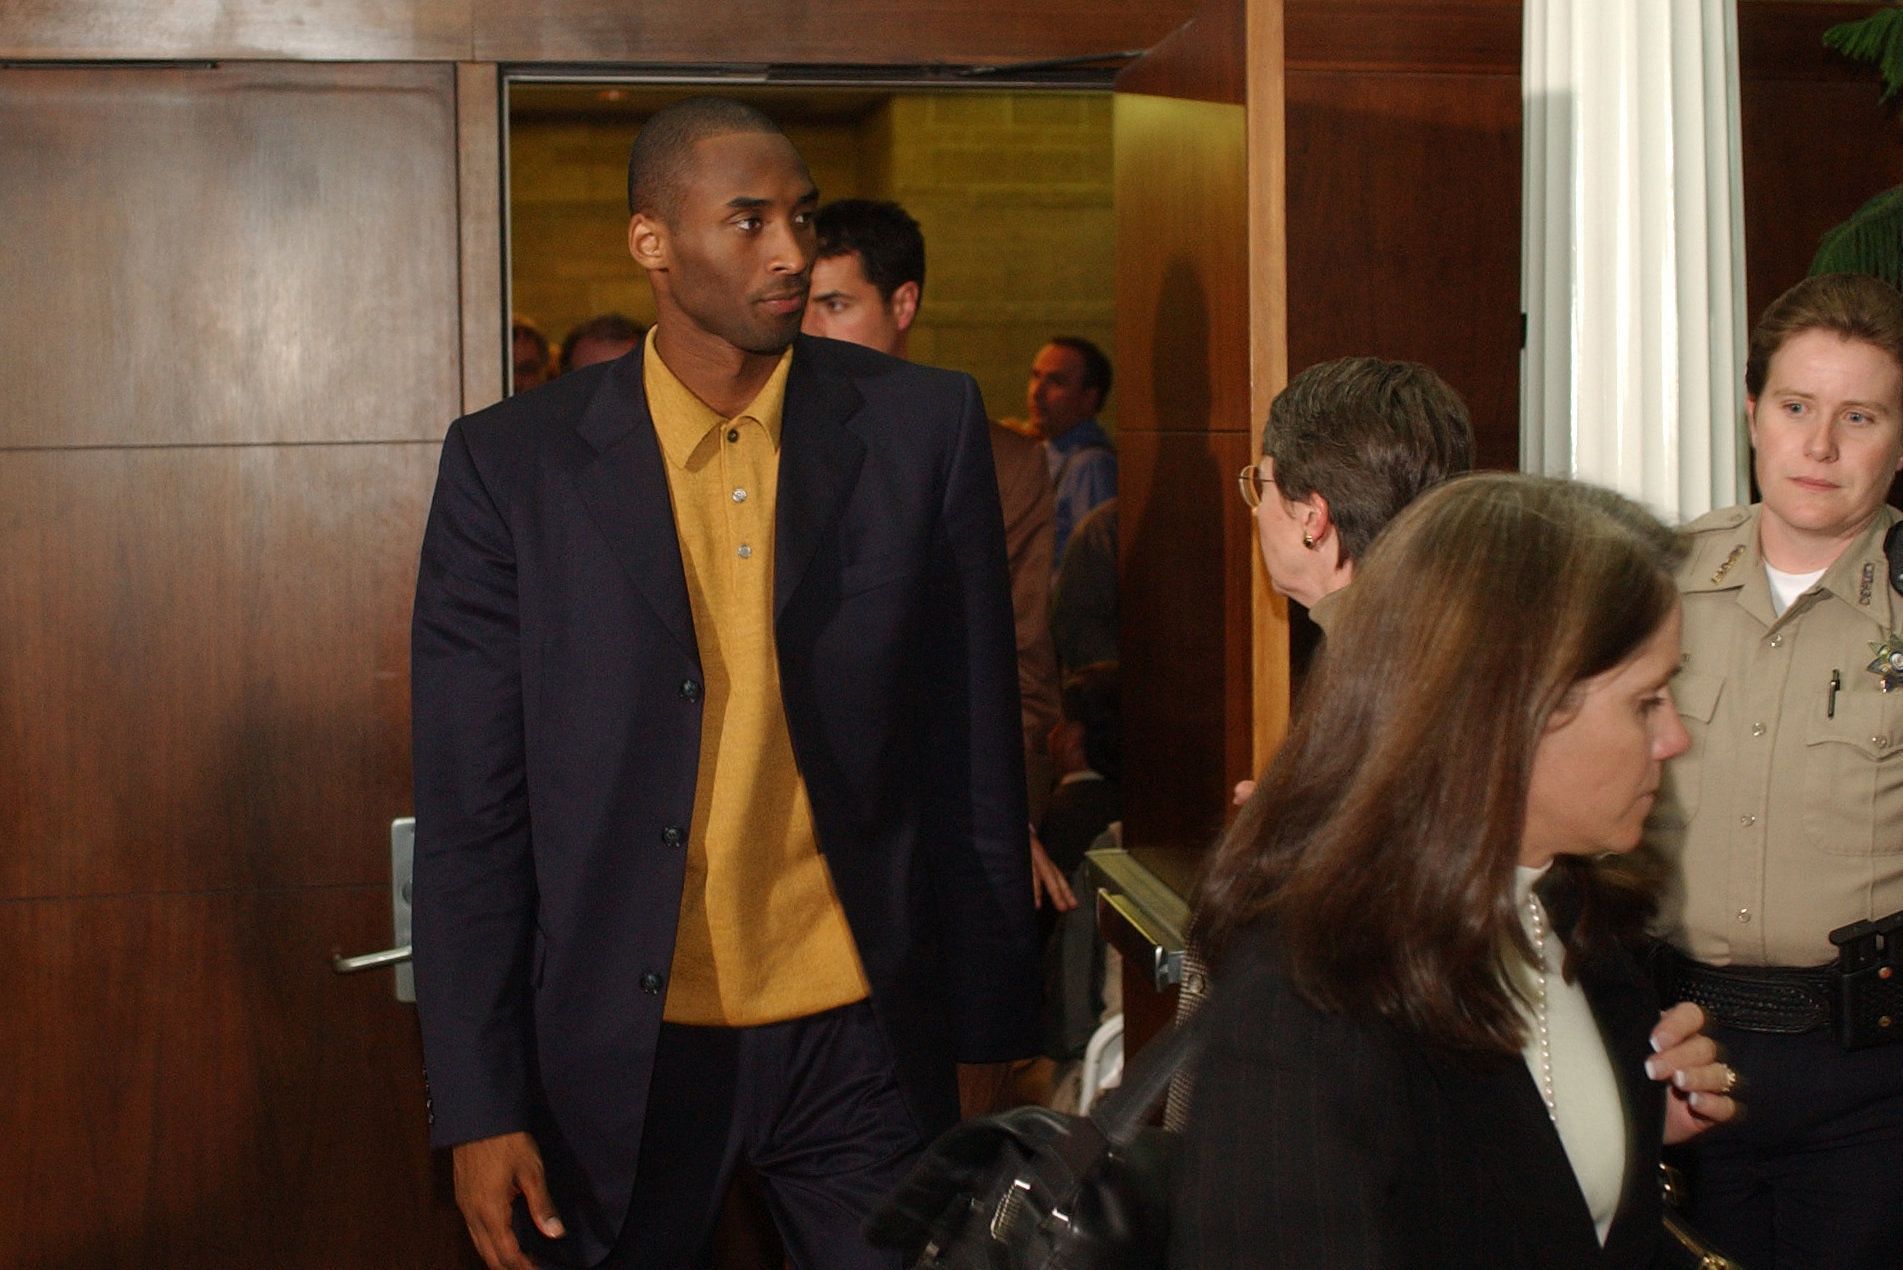 Kobe Bryant in the United State Courthouse in 2003